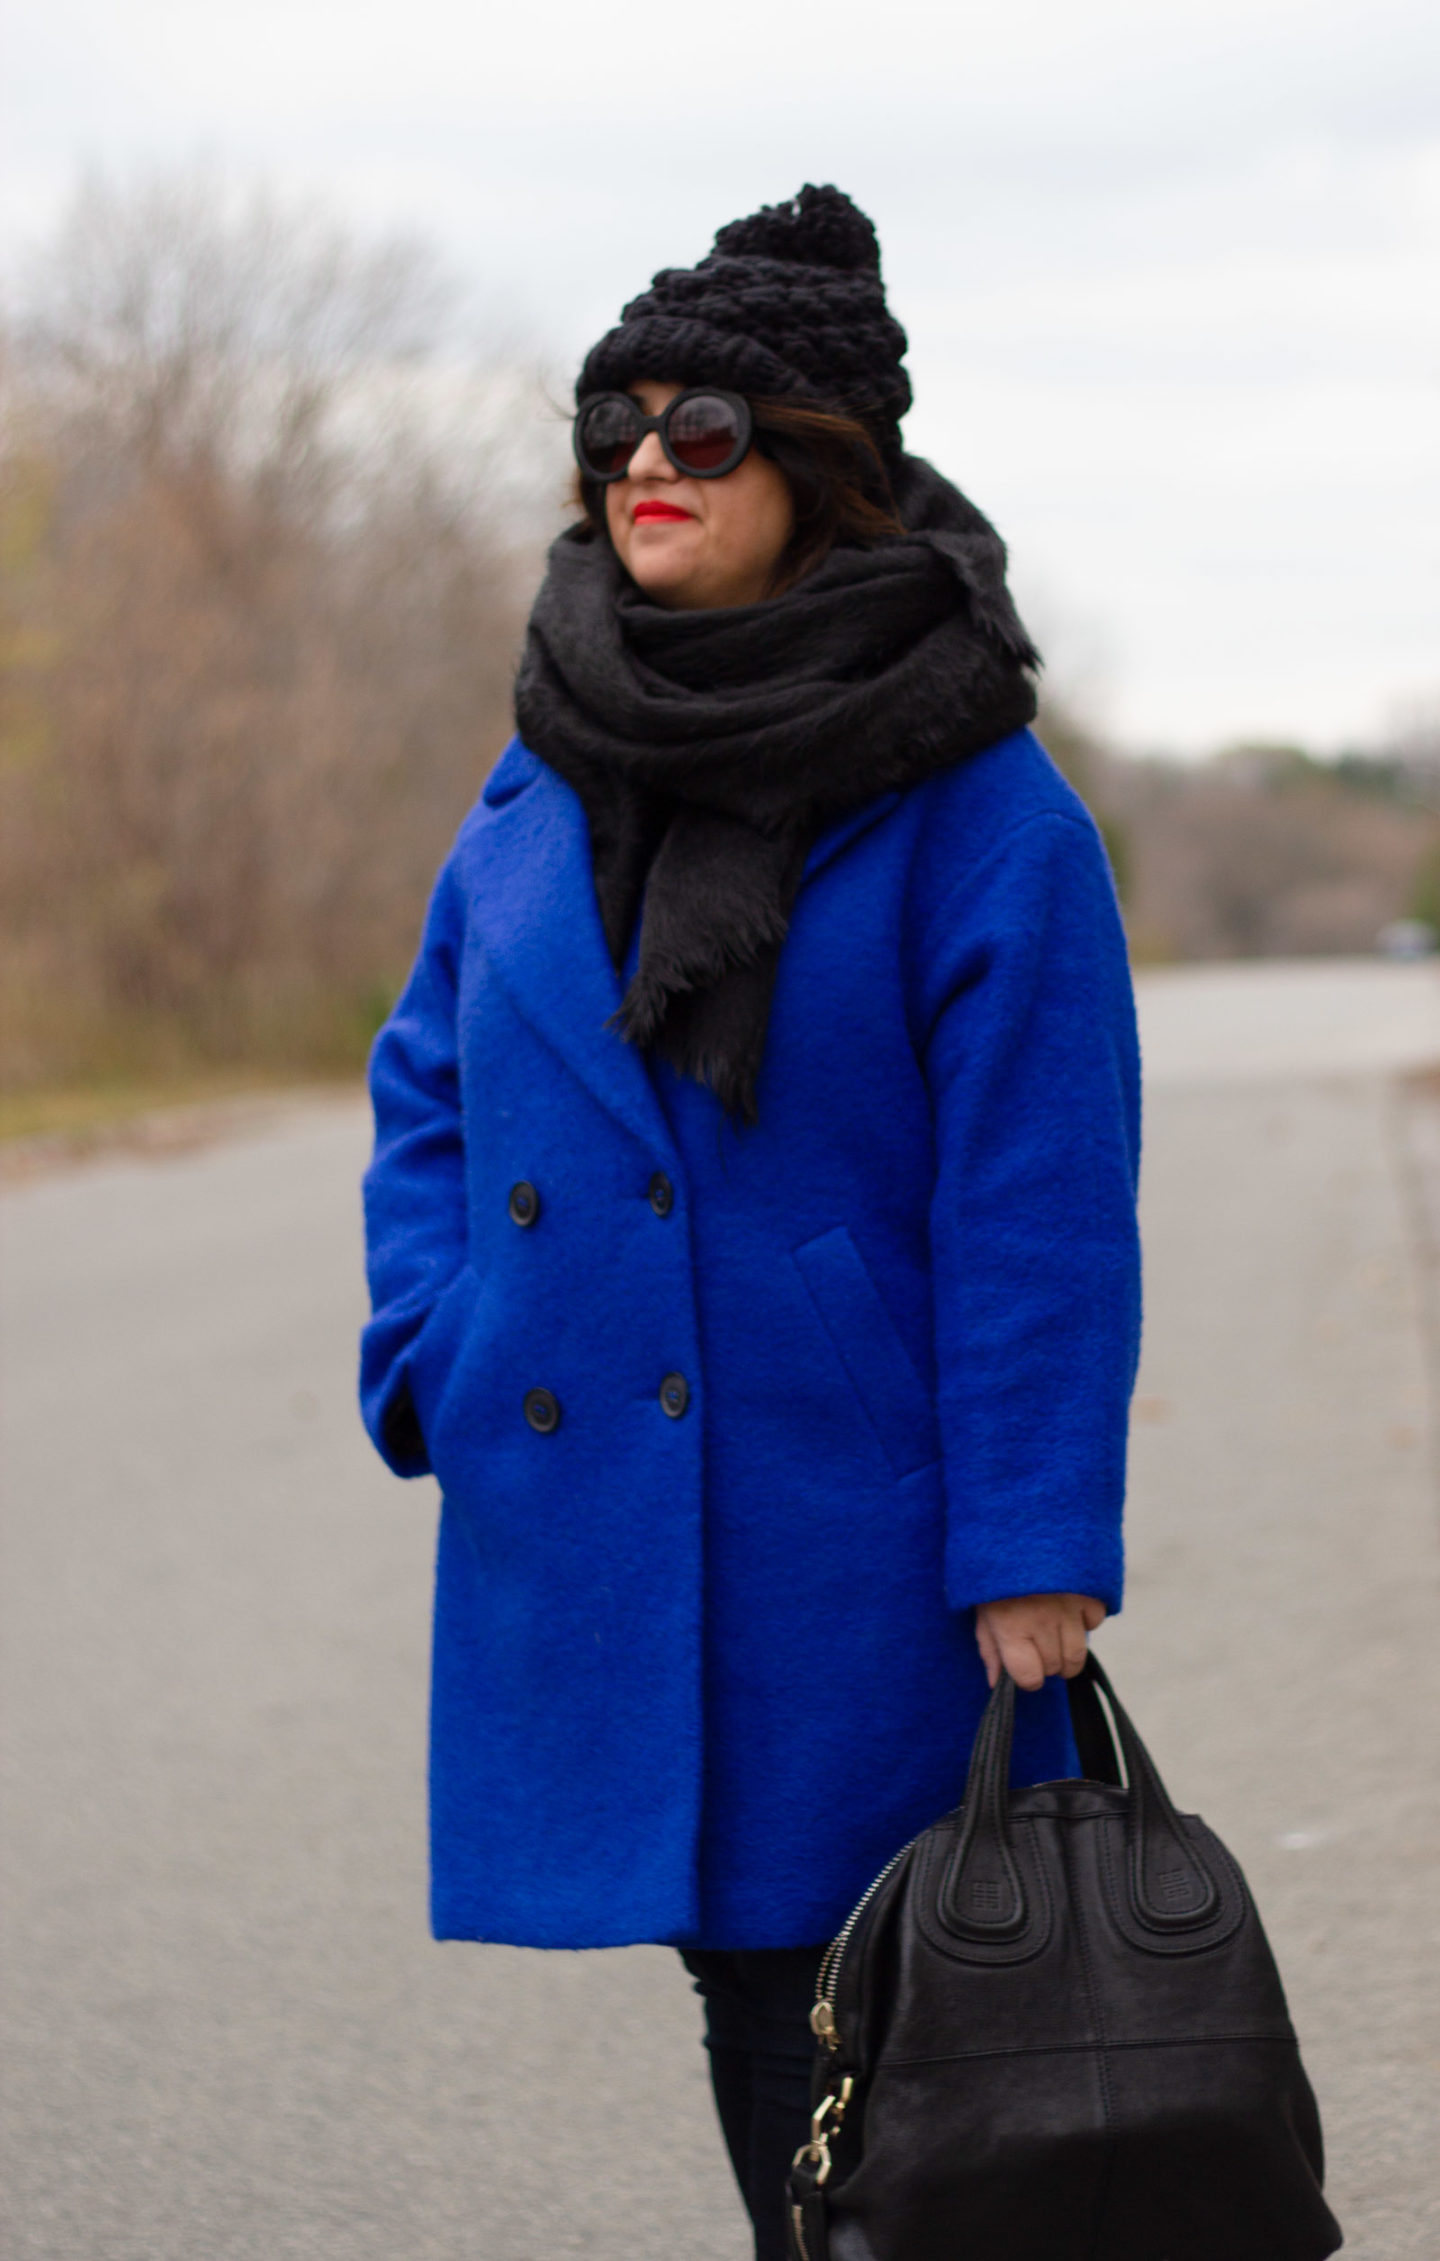 cobalt blue and black outfit